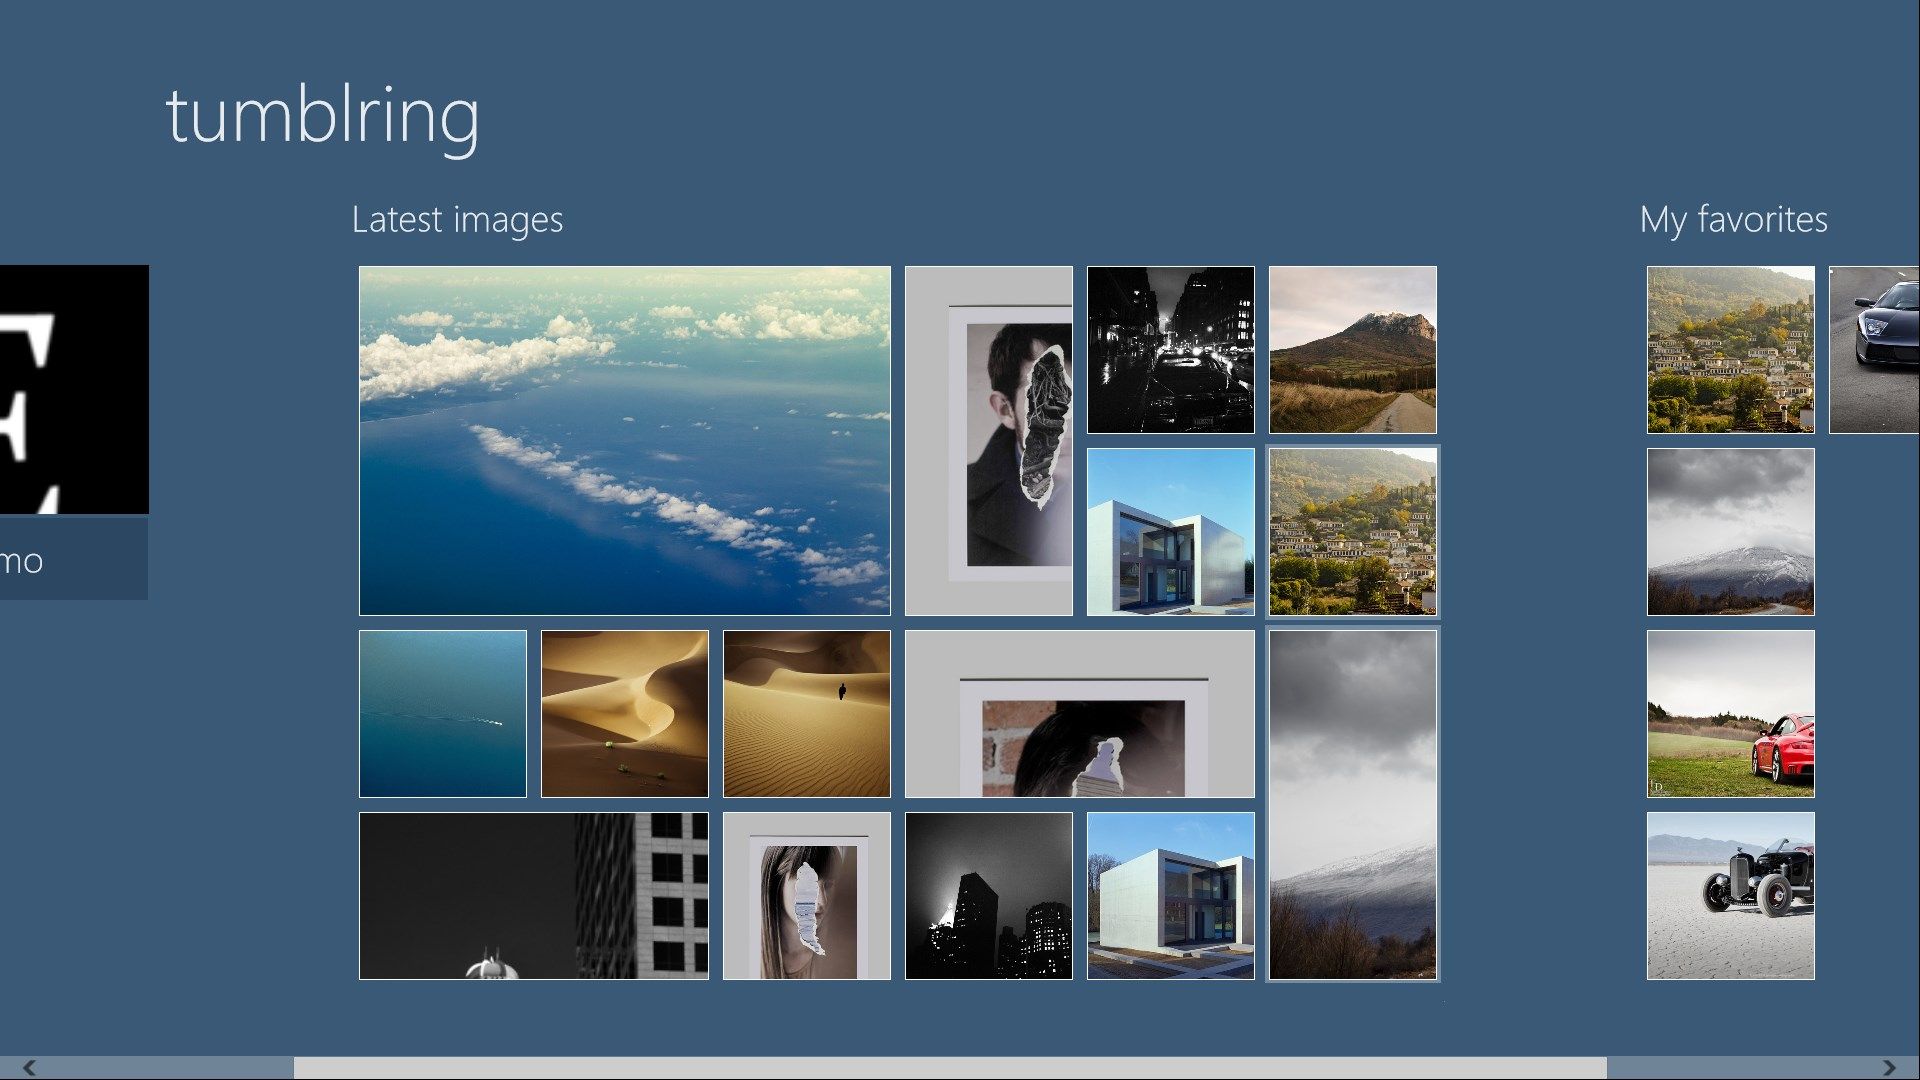 If you mark an image as favorite, your collection will be updated to have your most valuable images just a click away.